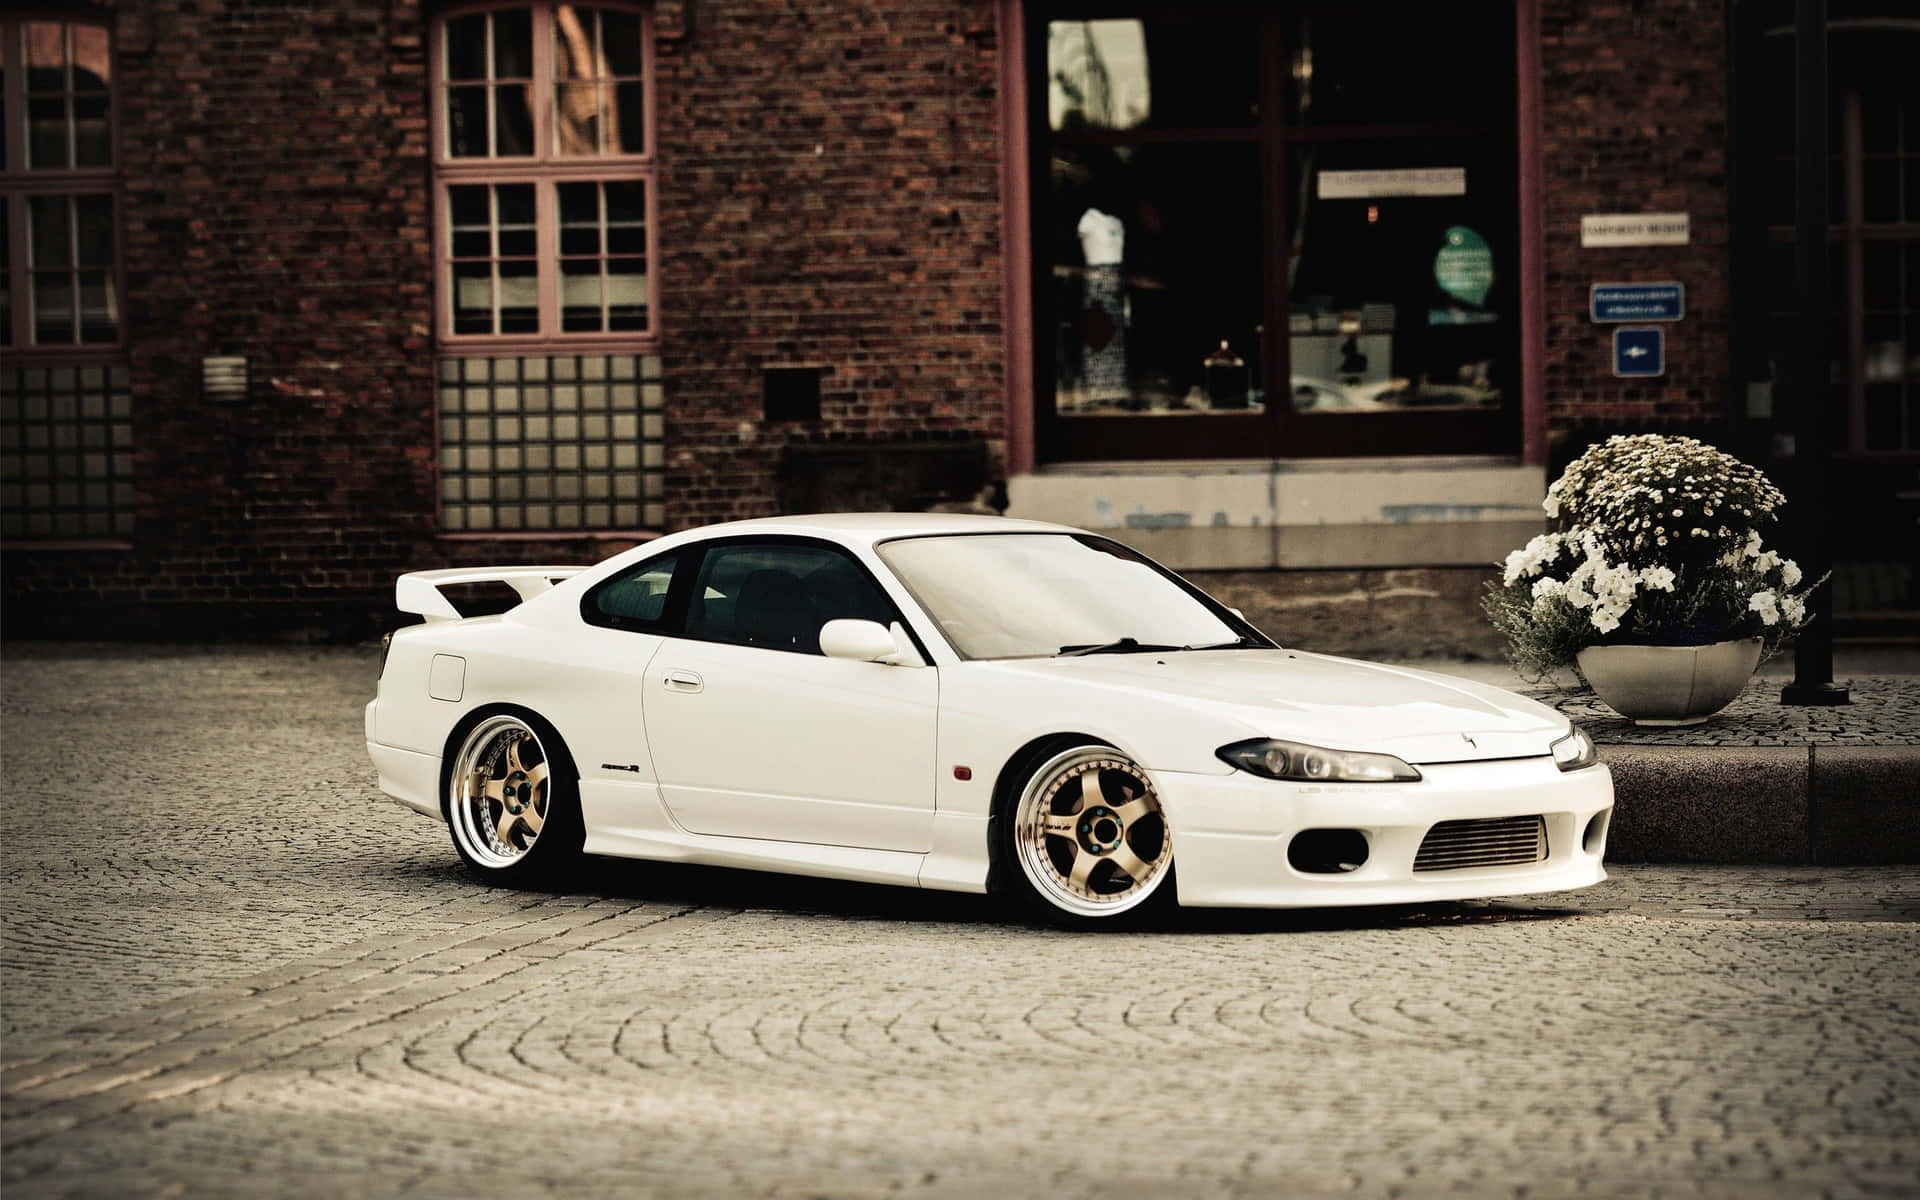 An Iconic Japanese Sports Coupe - Nissan Silvia S15 Wallpaper